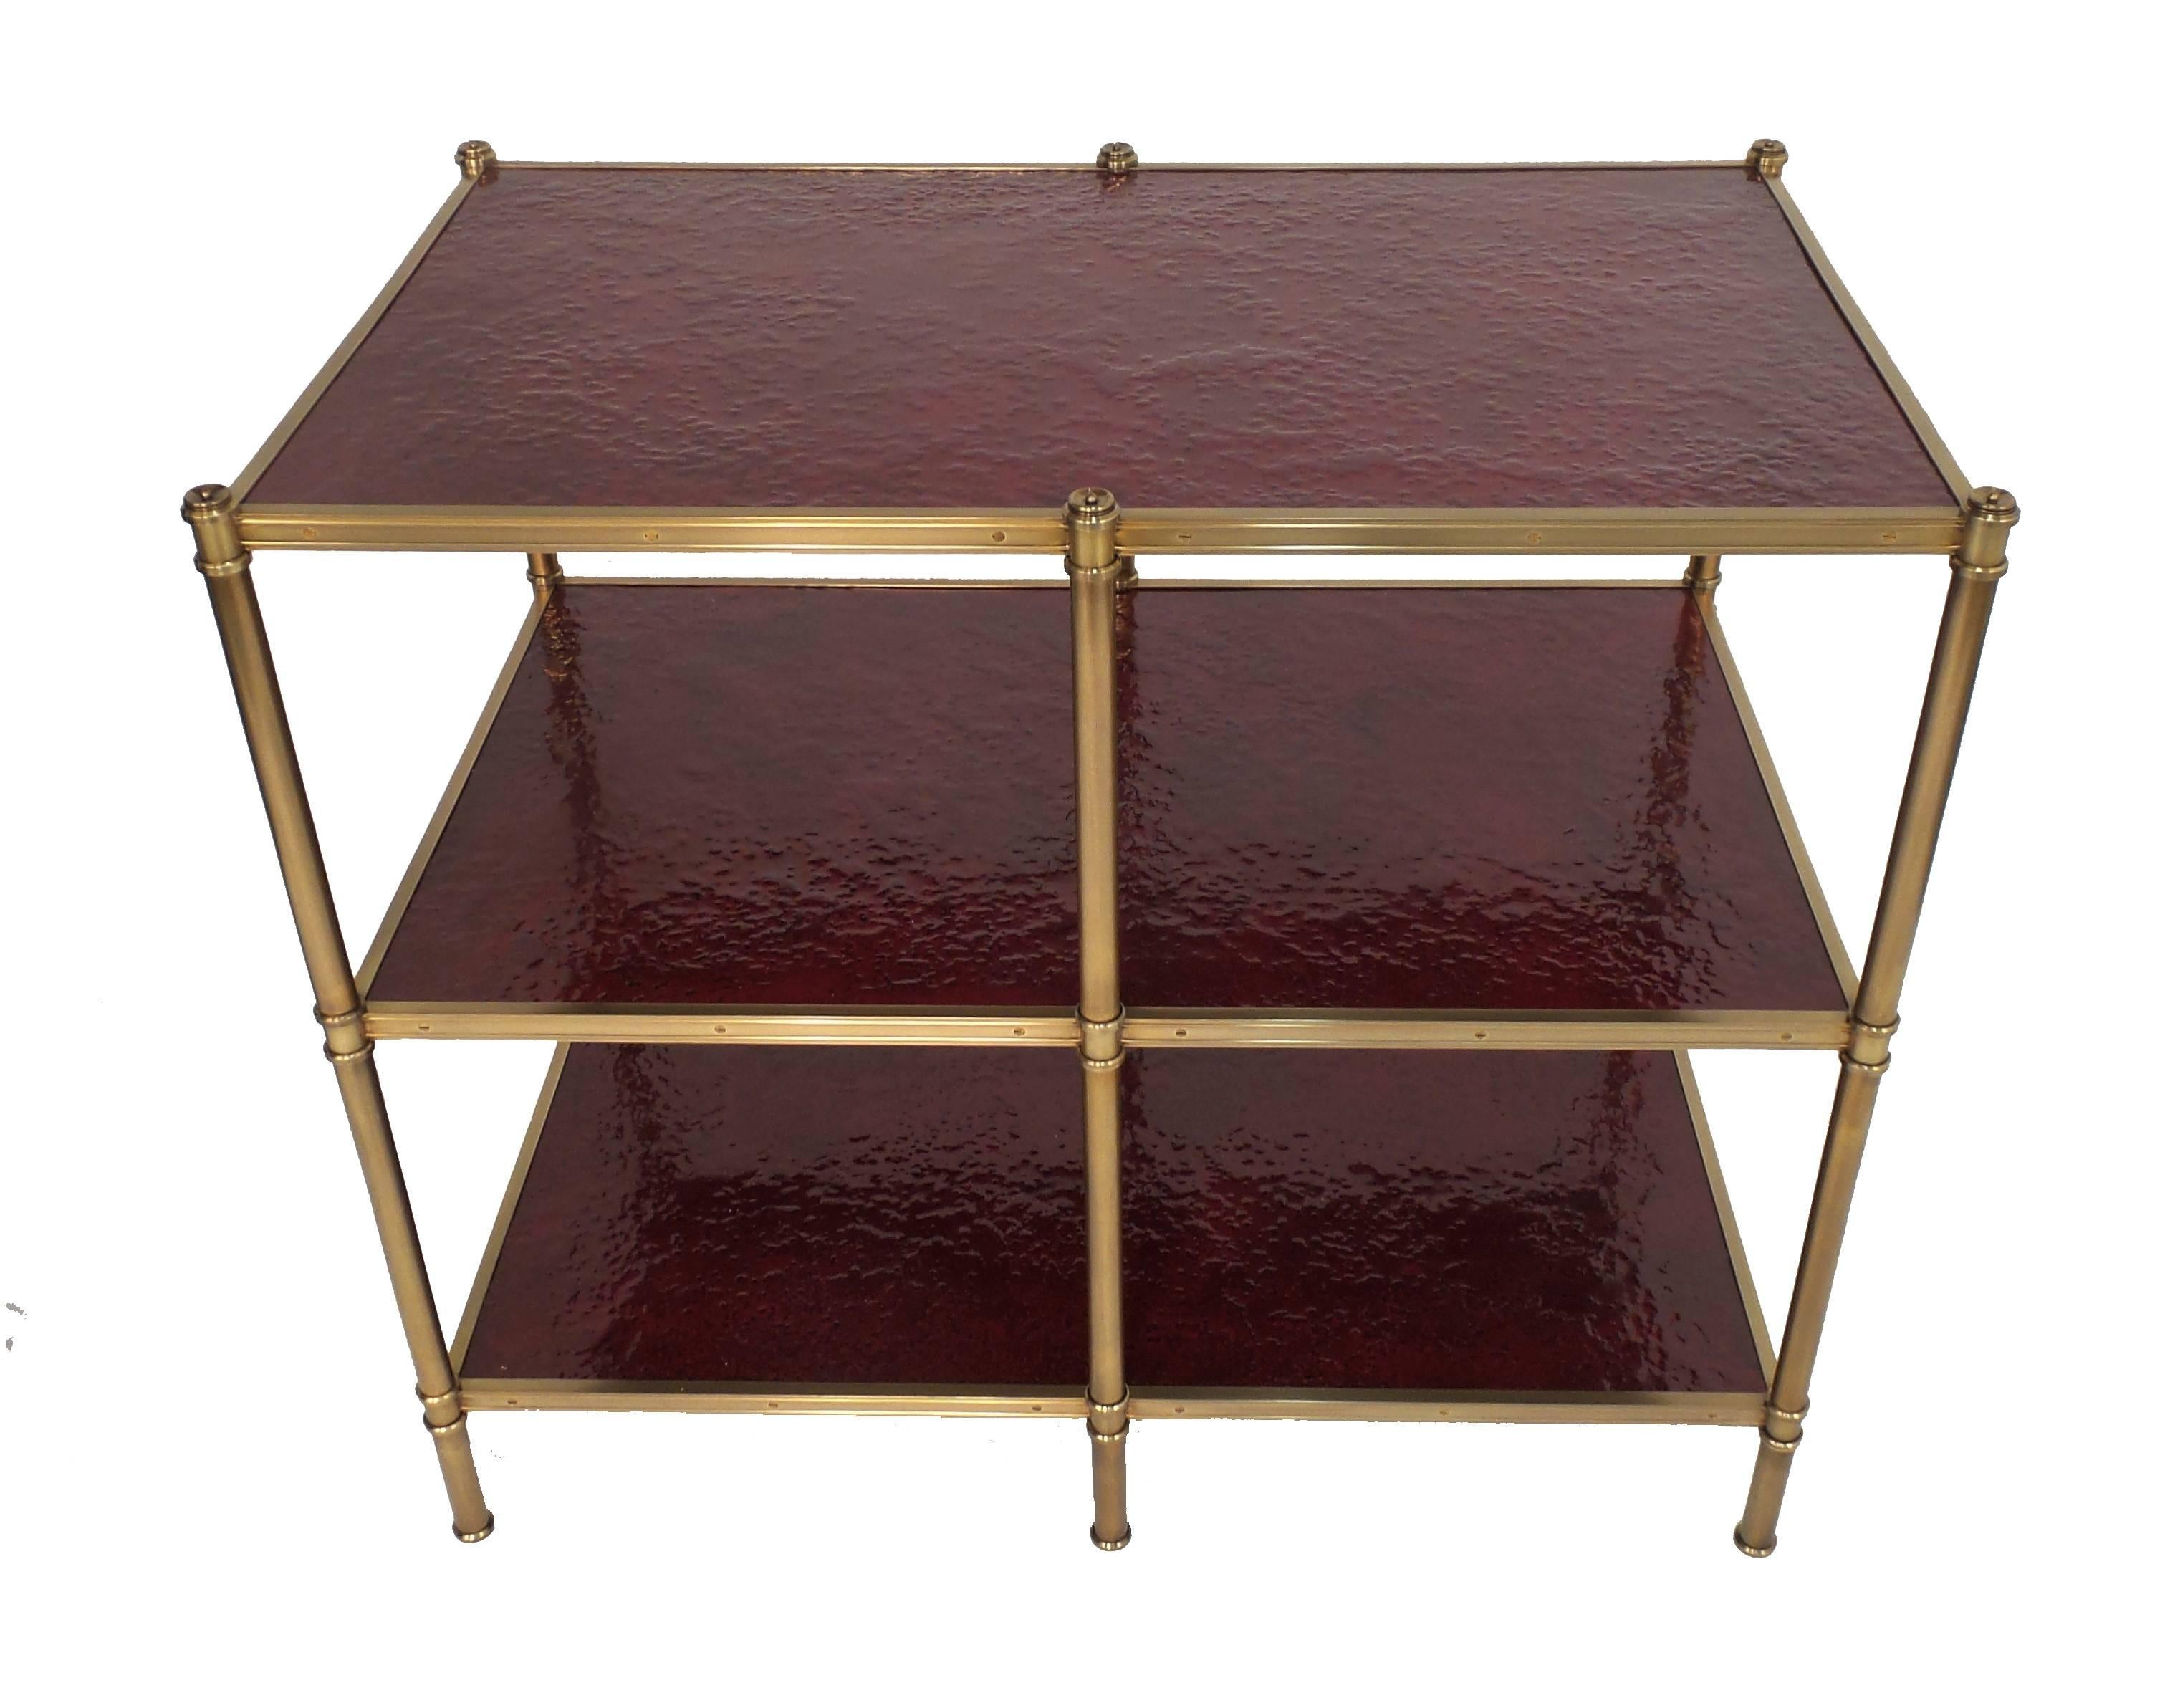 A custom low bookcase, or sofa table, version of the étagère designed by Frederick Victoria for Billy Baldwin's client Cole Porter with three shelves having a textured surface in crimson molten gypsum finish, in a patinated brass frame. Custom